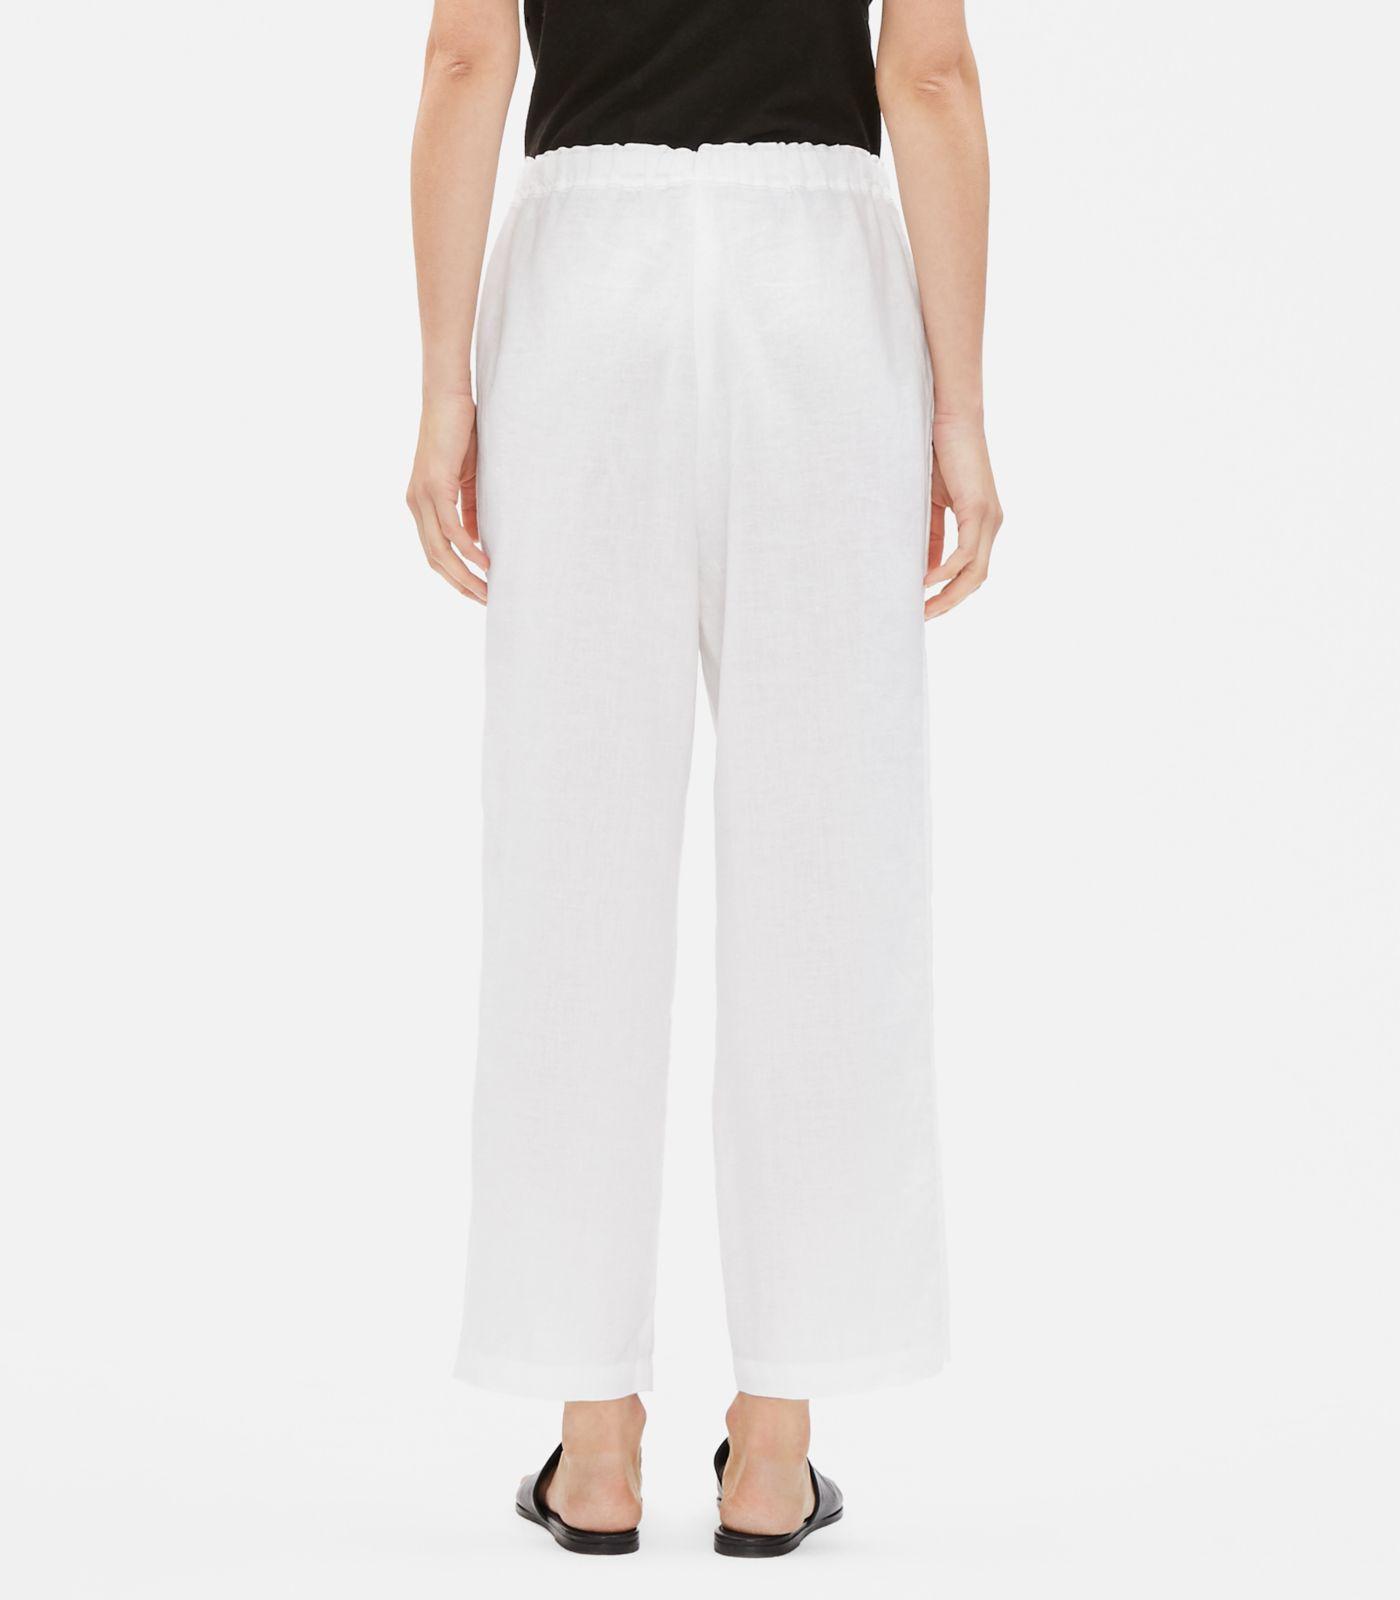 Lyst - Eileen Fisher Organic Linen Straight Cropped Pant in White